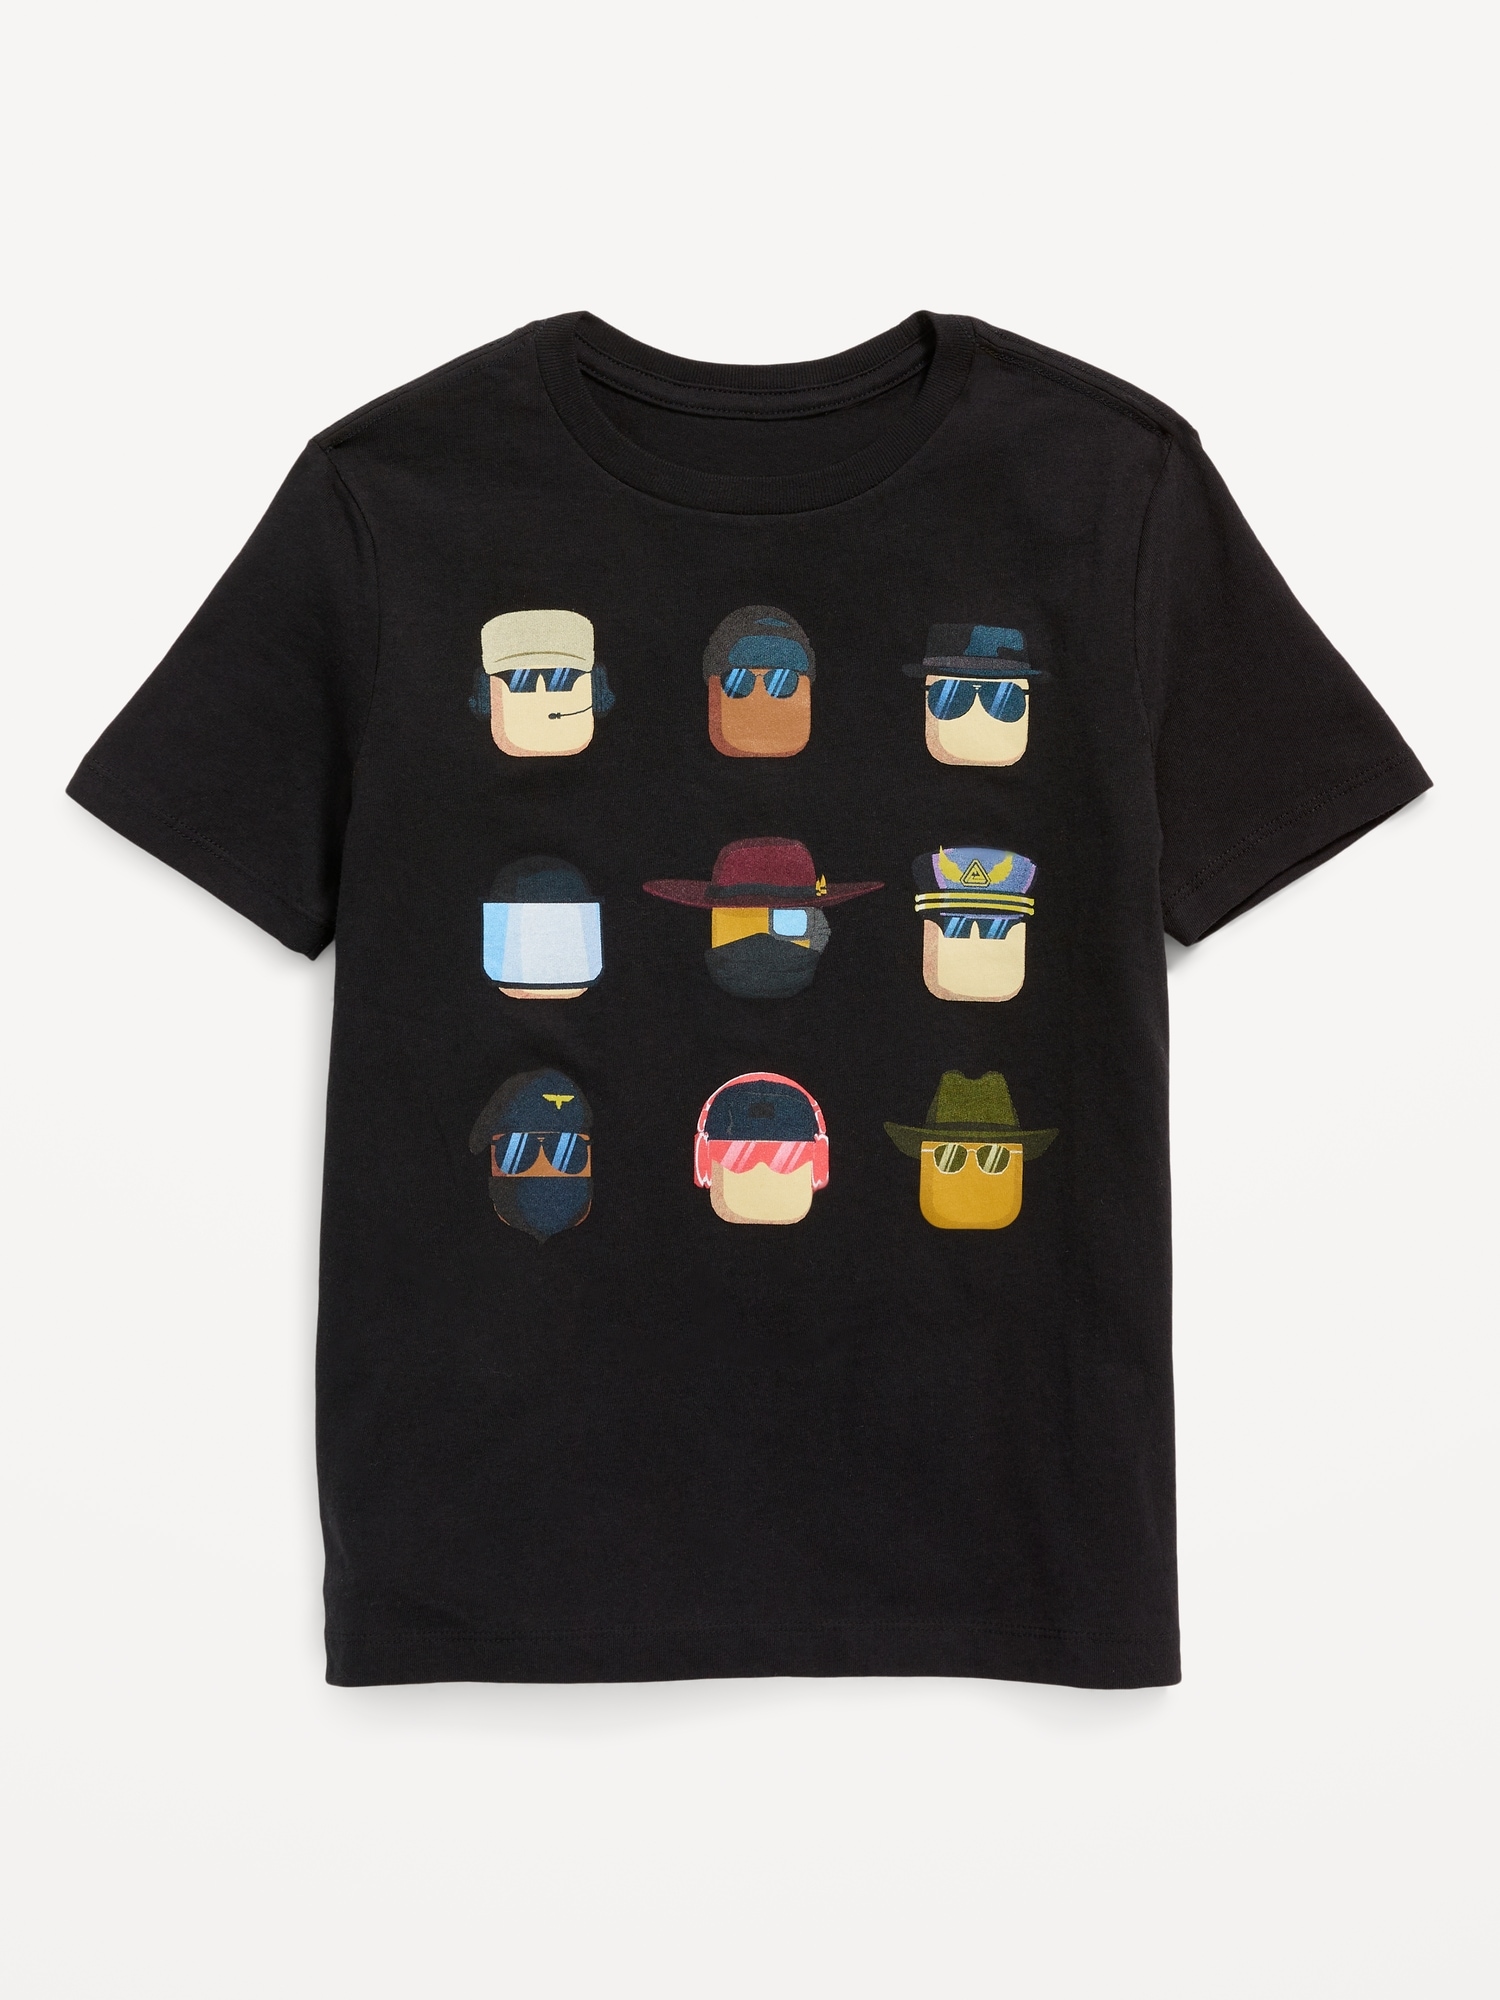 Roblox Gender-Neutral T-Shirt for Kids | Old Navy